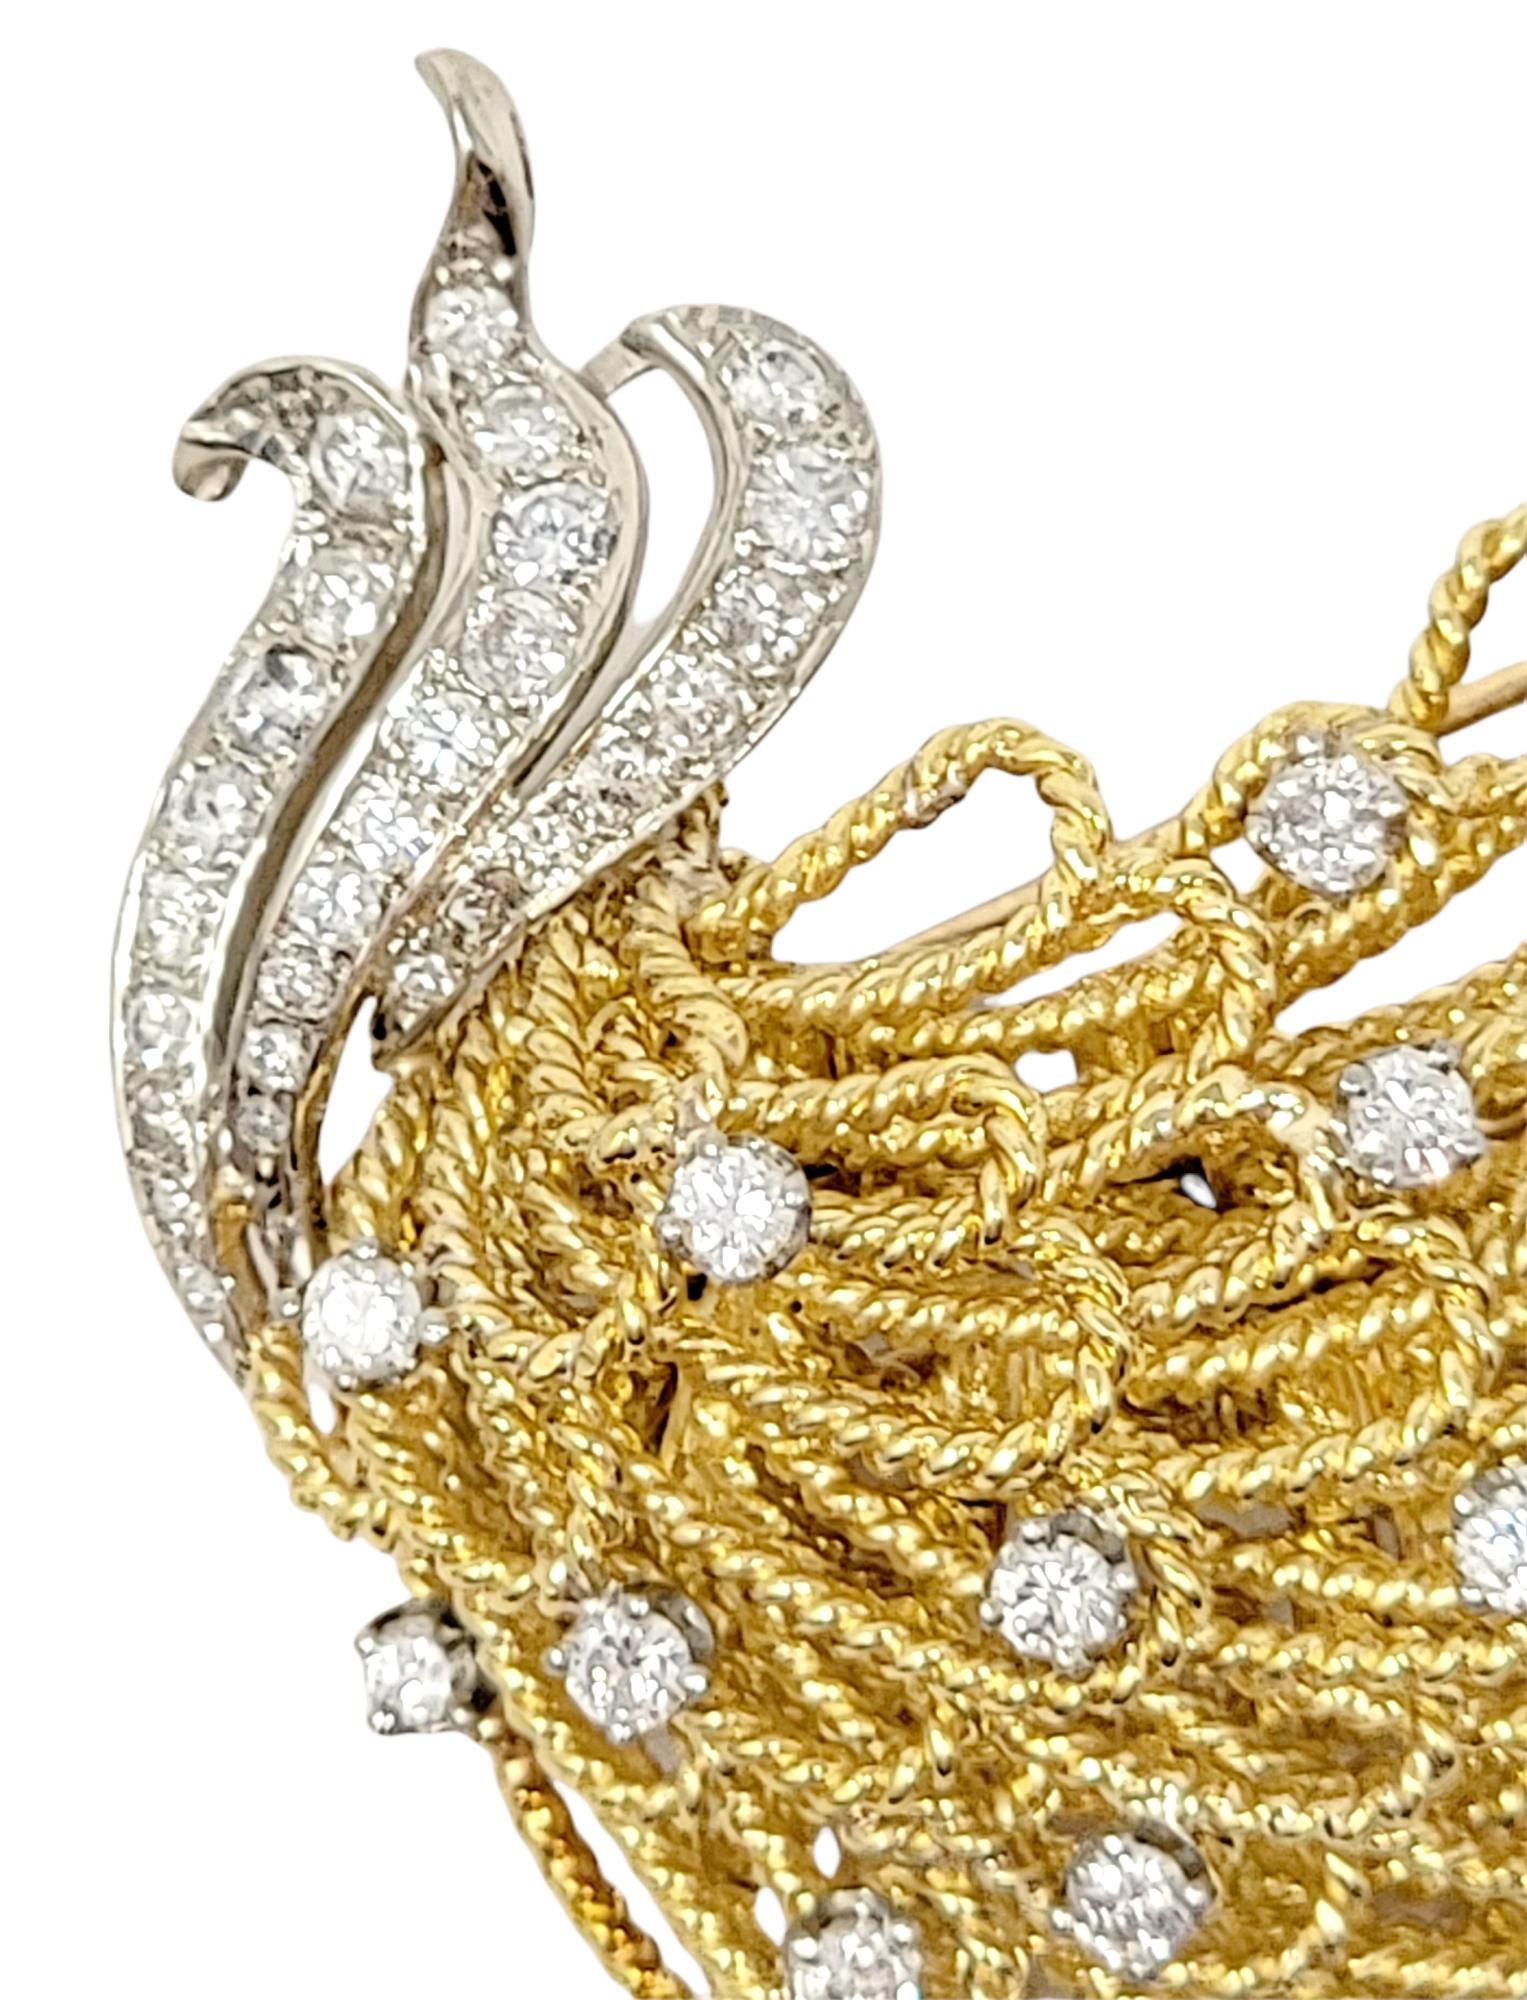 Absolutely exquisite diamond and 18 karat yellow gold peacock motif brooch / hatpin by Erwin Pearl. This beautifully detailed piece is accented by incredible sparkling diamonds that shimmer throughout. The stunning brooch features multiple layers of